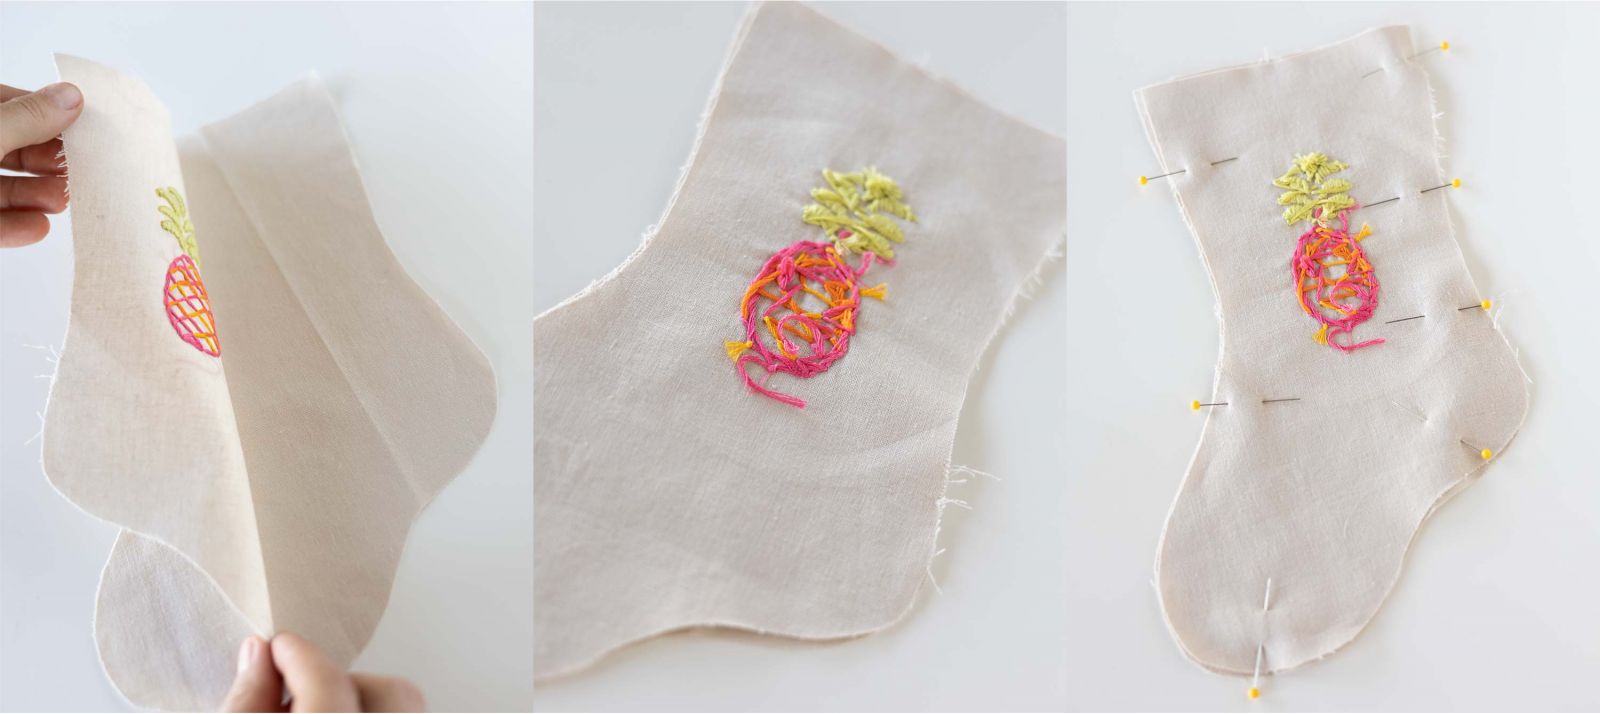 DIY Embroidered Pineapple Holiday Stockings